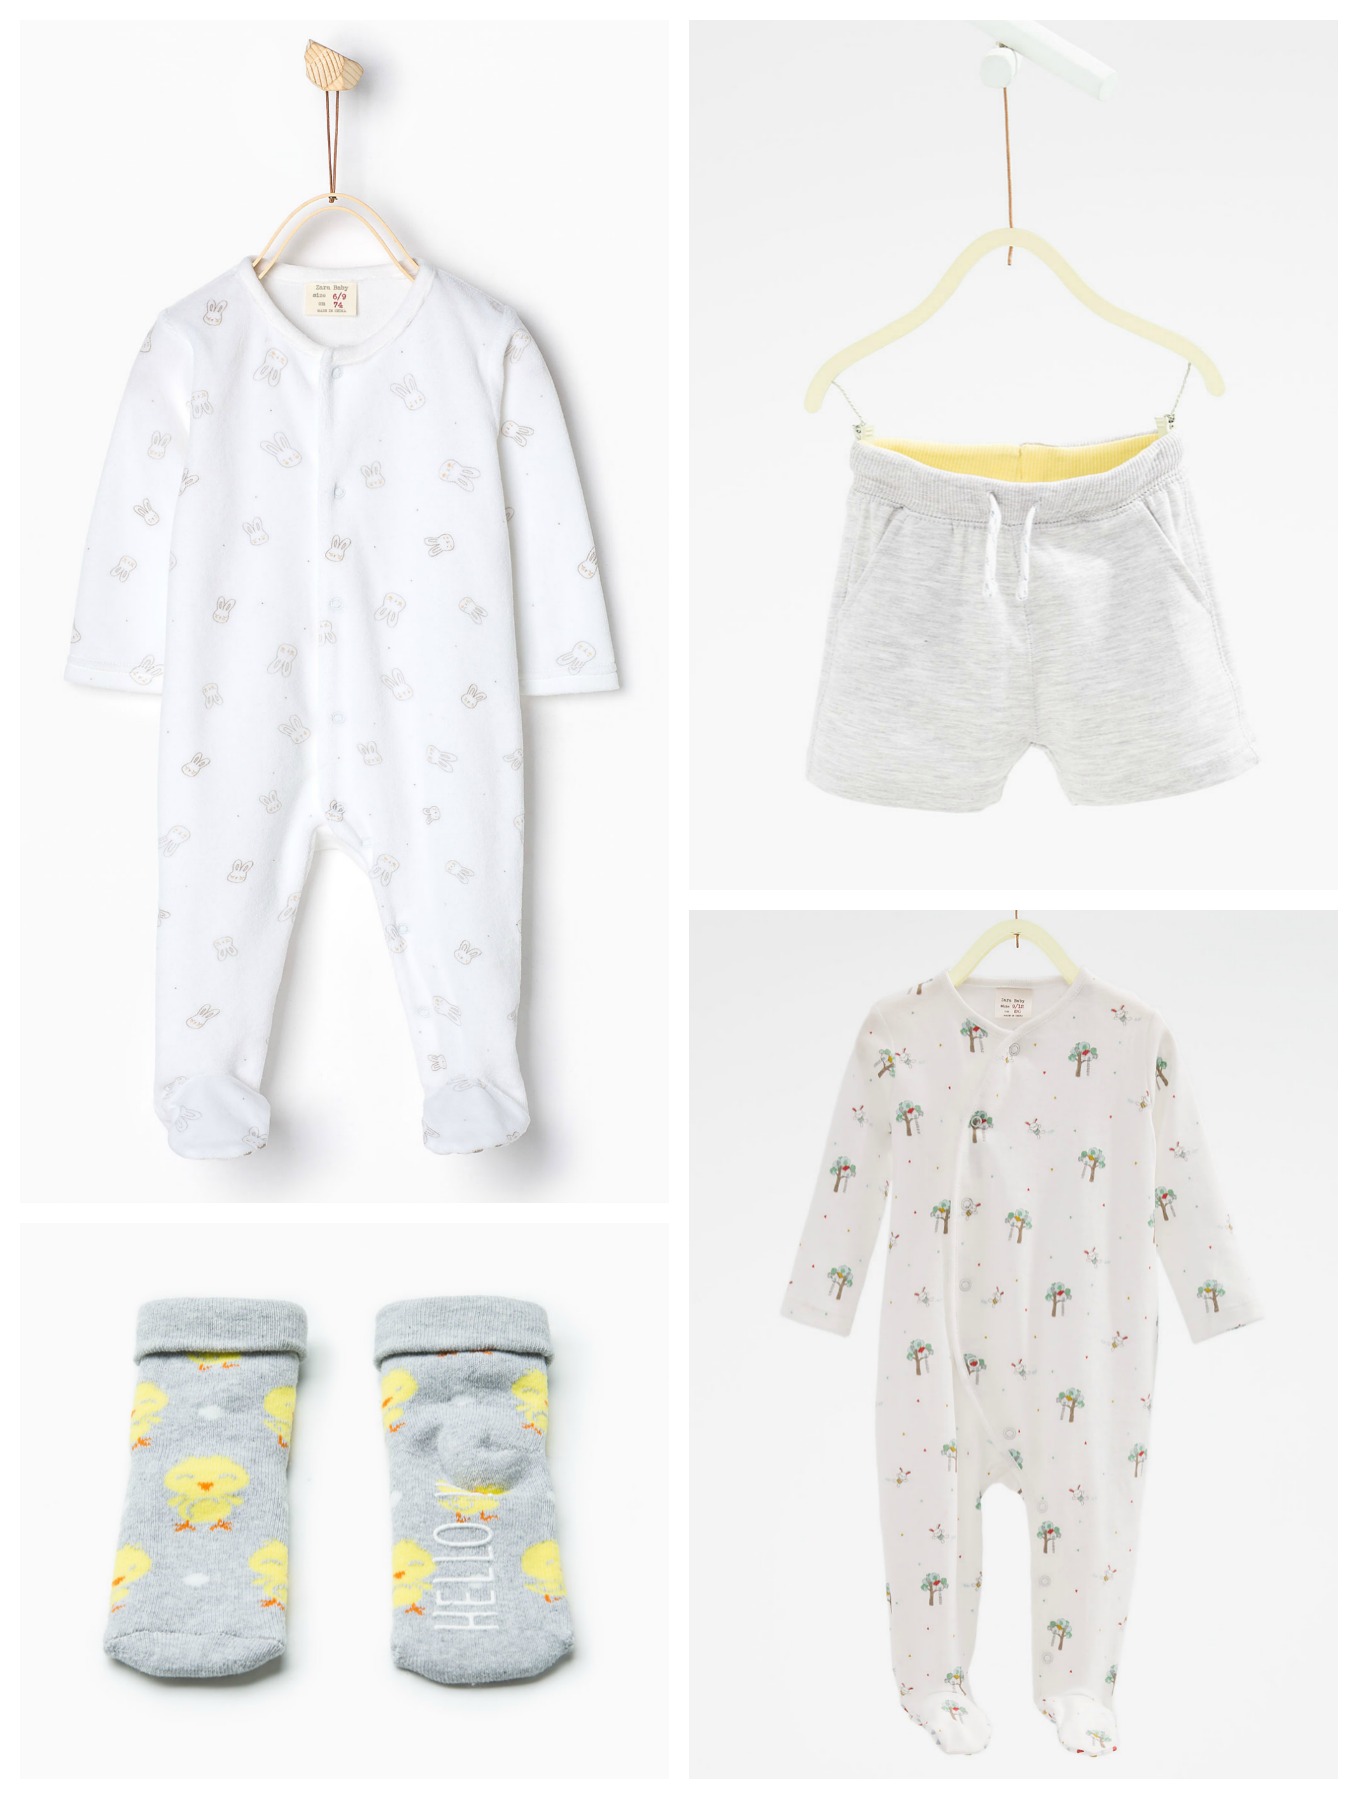 Unisex Baby Clothes Perfect For Spring - Lamb & Bear